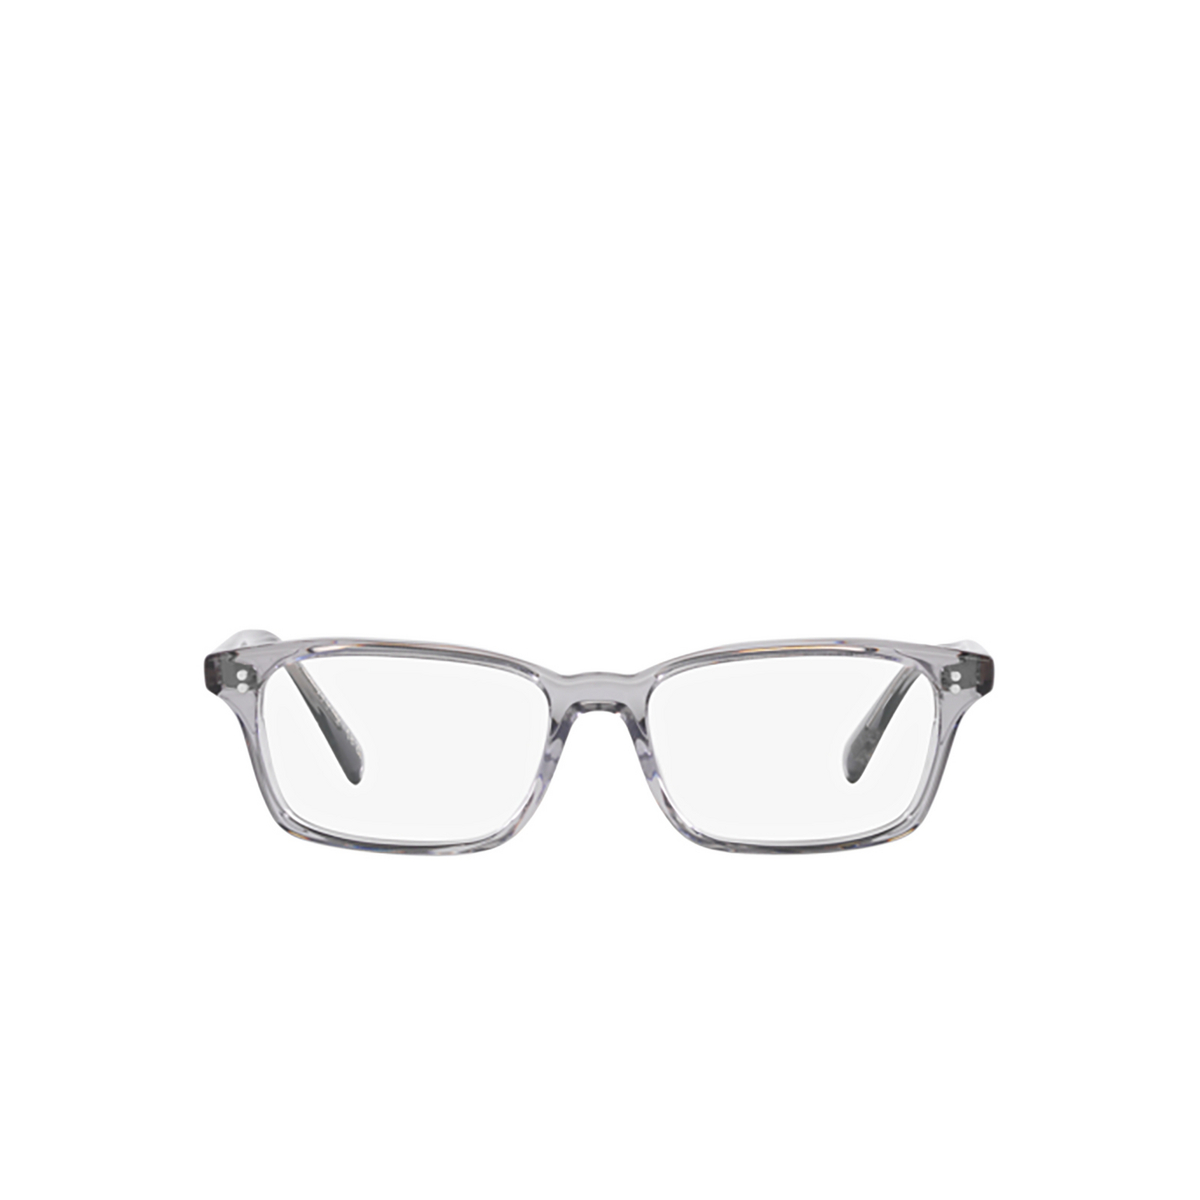 Oliver Peoples EDELSON Eyeglasses 1132 Workman Grey - front view